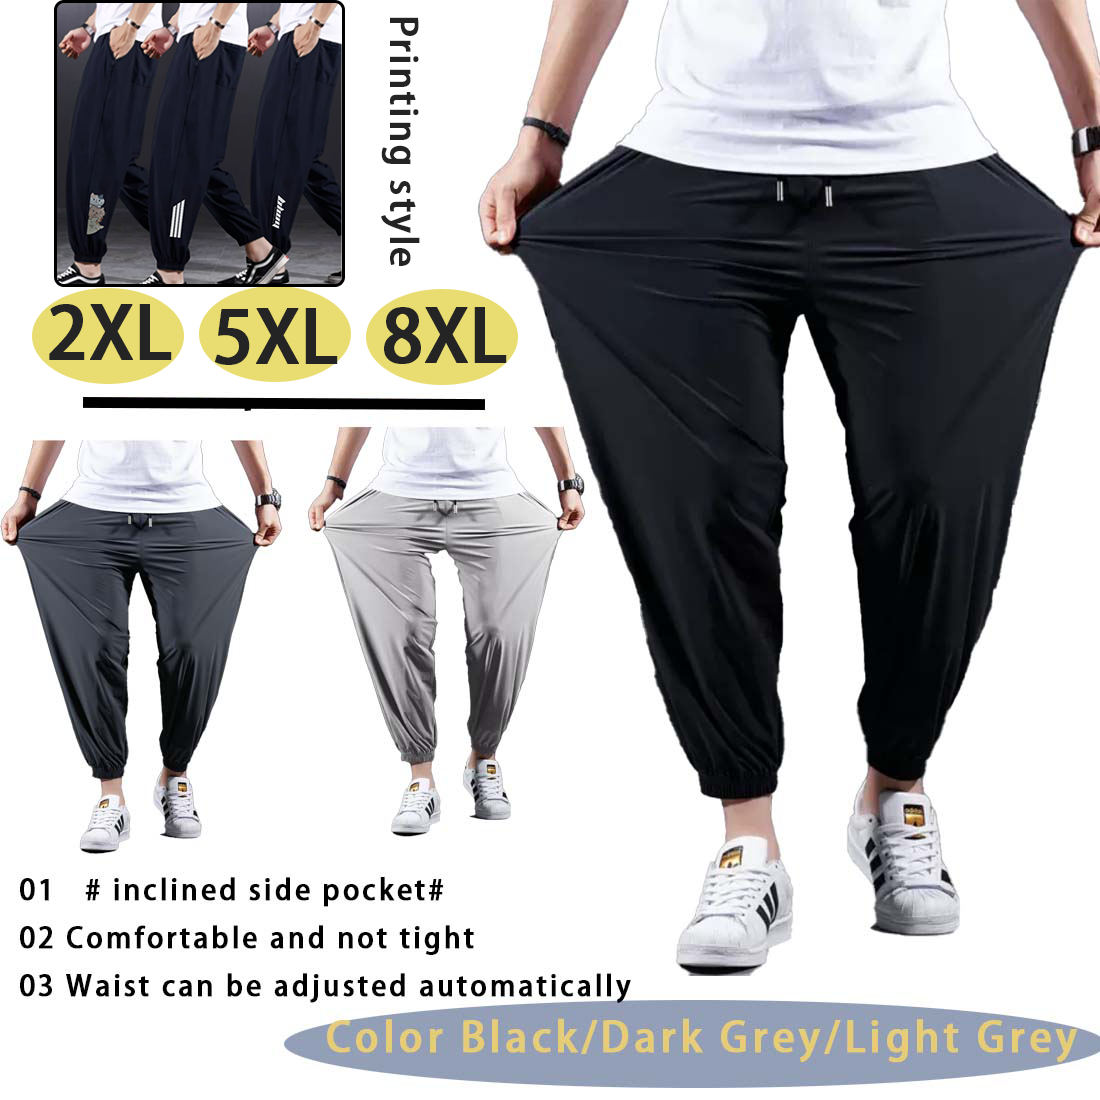 Plus Size S-4XL Women's pants running Yoga fitness sports Jogger trousers  pants for women